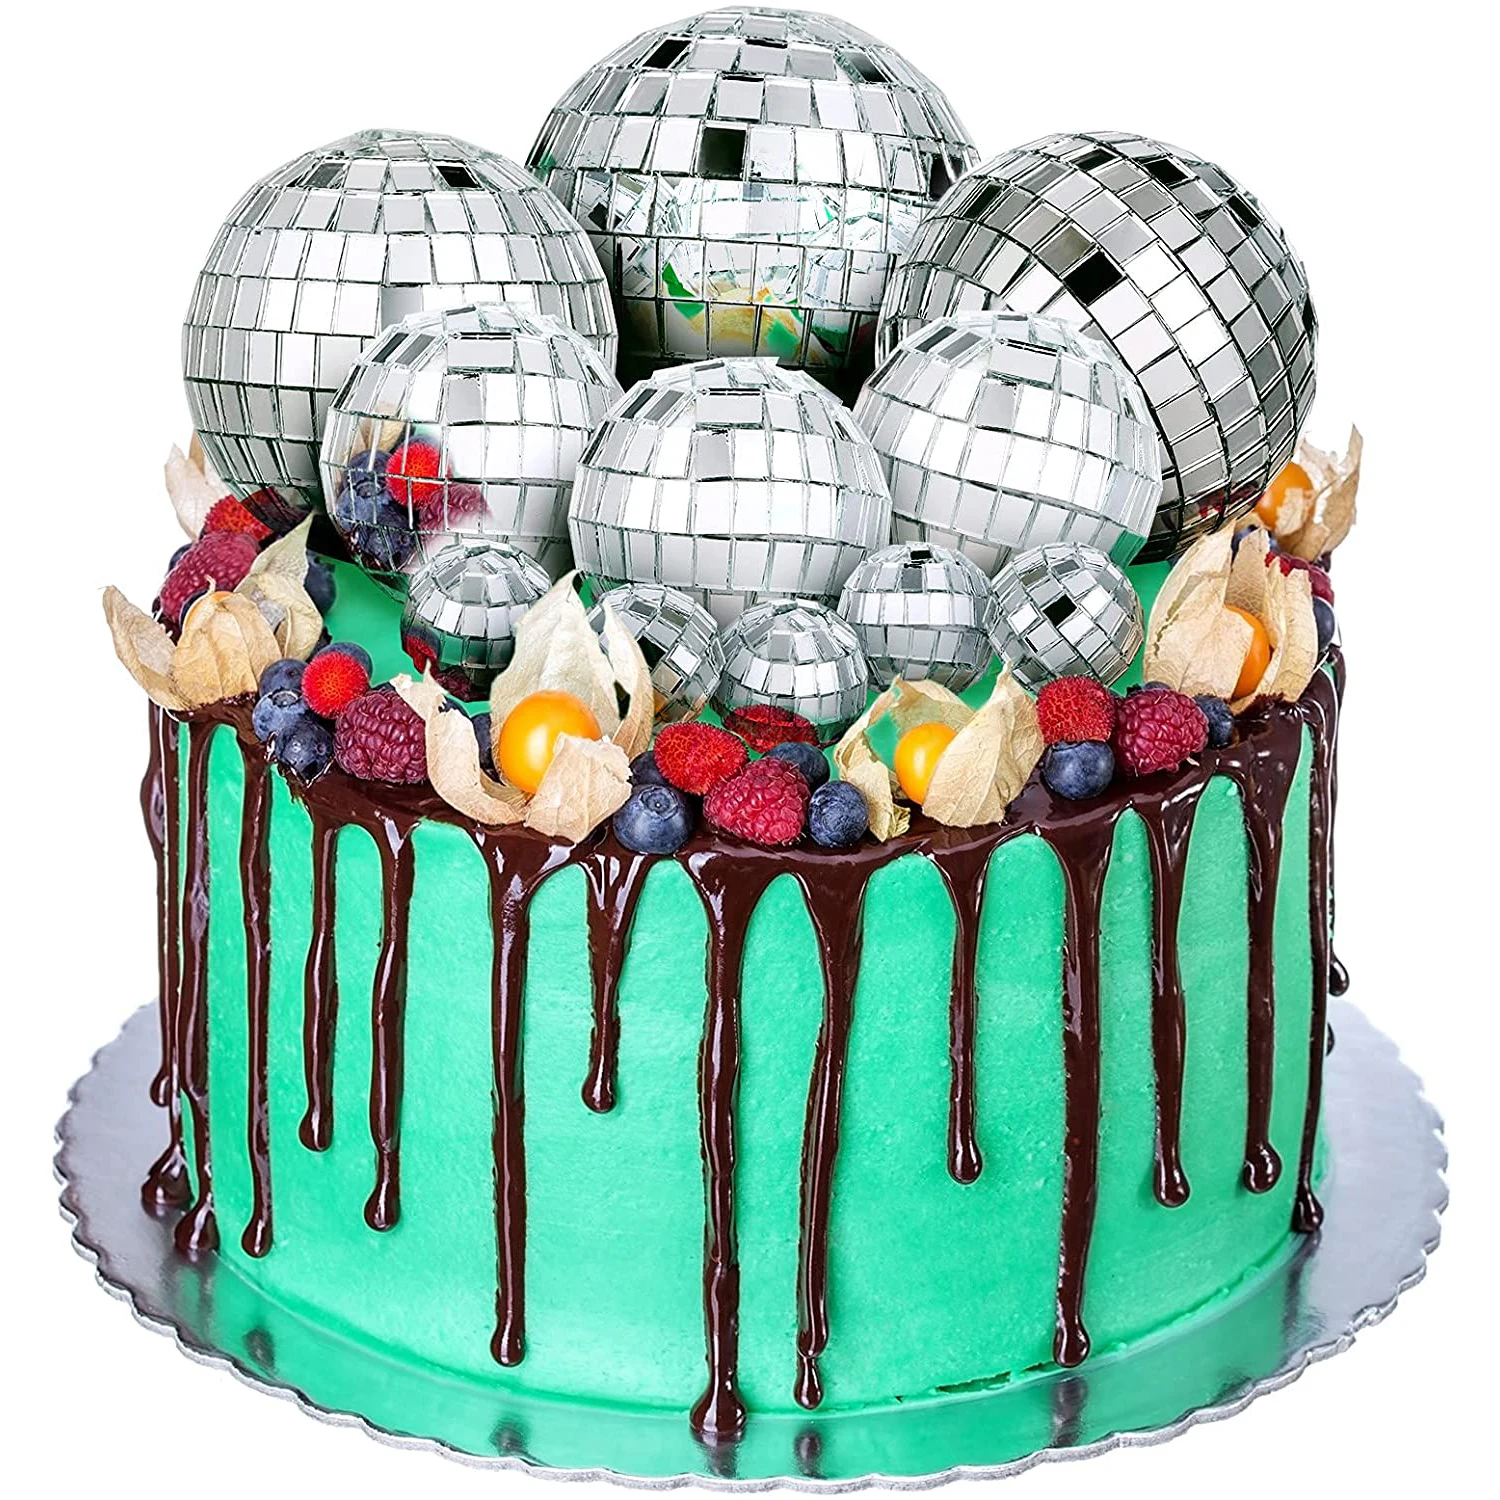 

11 Pieces Disco Ball Cake Decoration Disco Ball Table Decorations 70s Disco Themed Cake Toppers for Birthday Christmas Disco